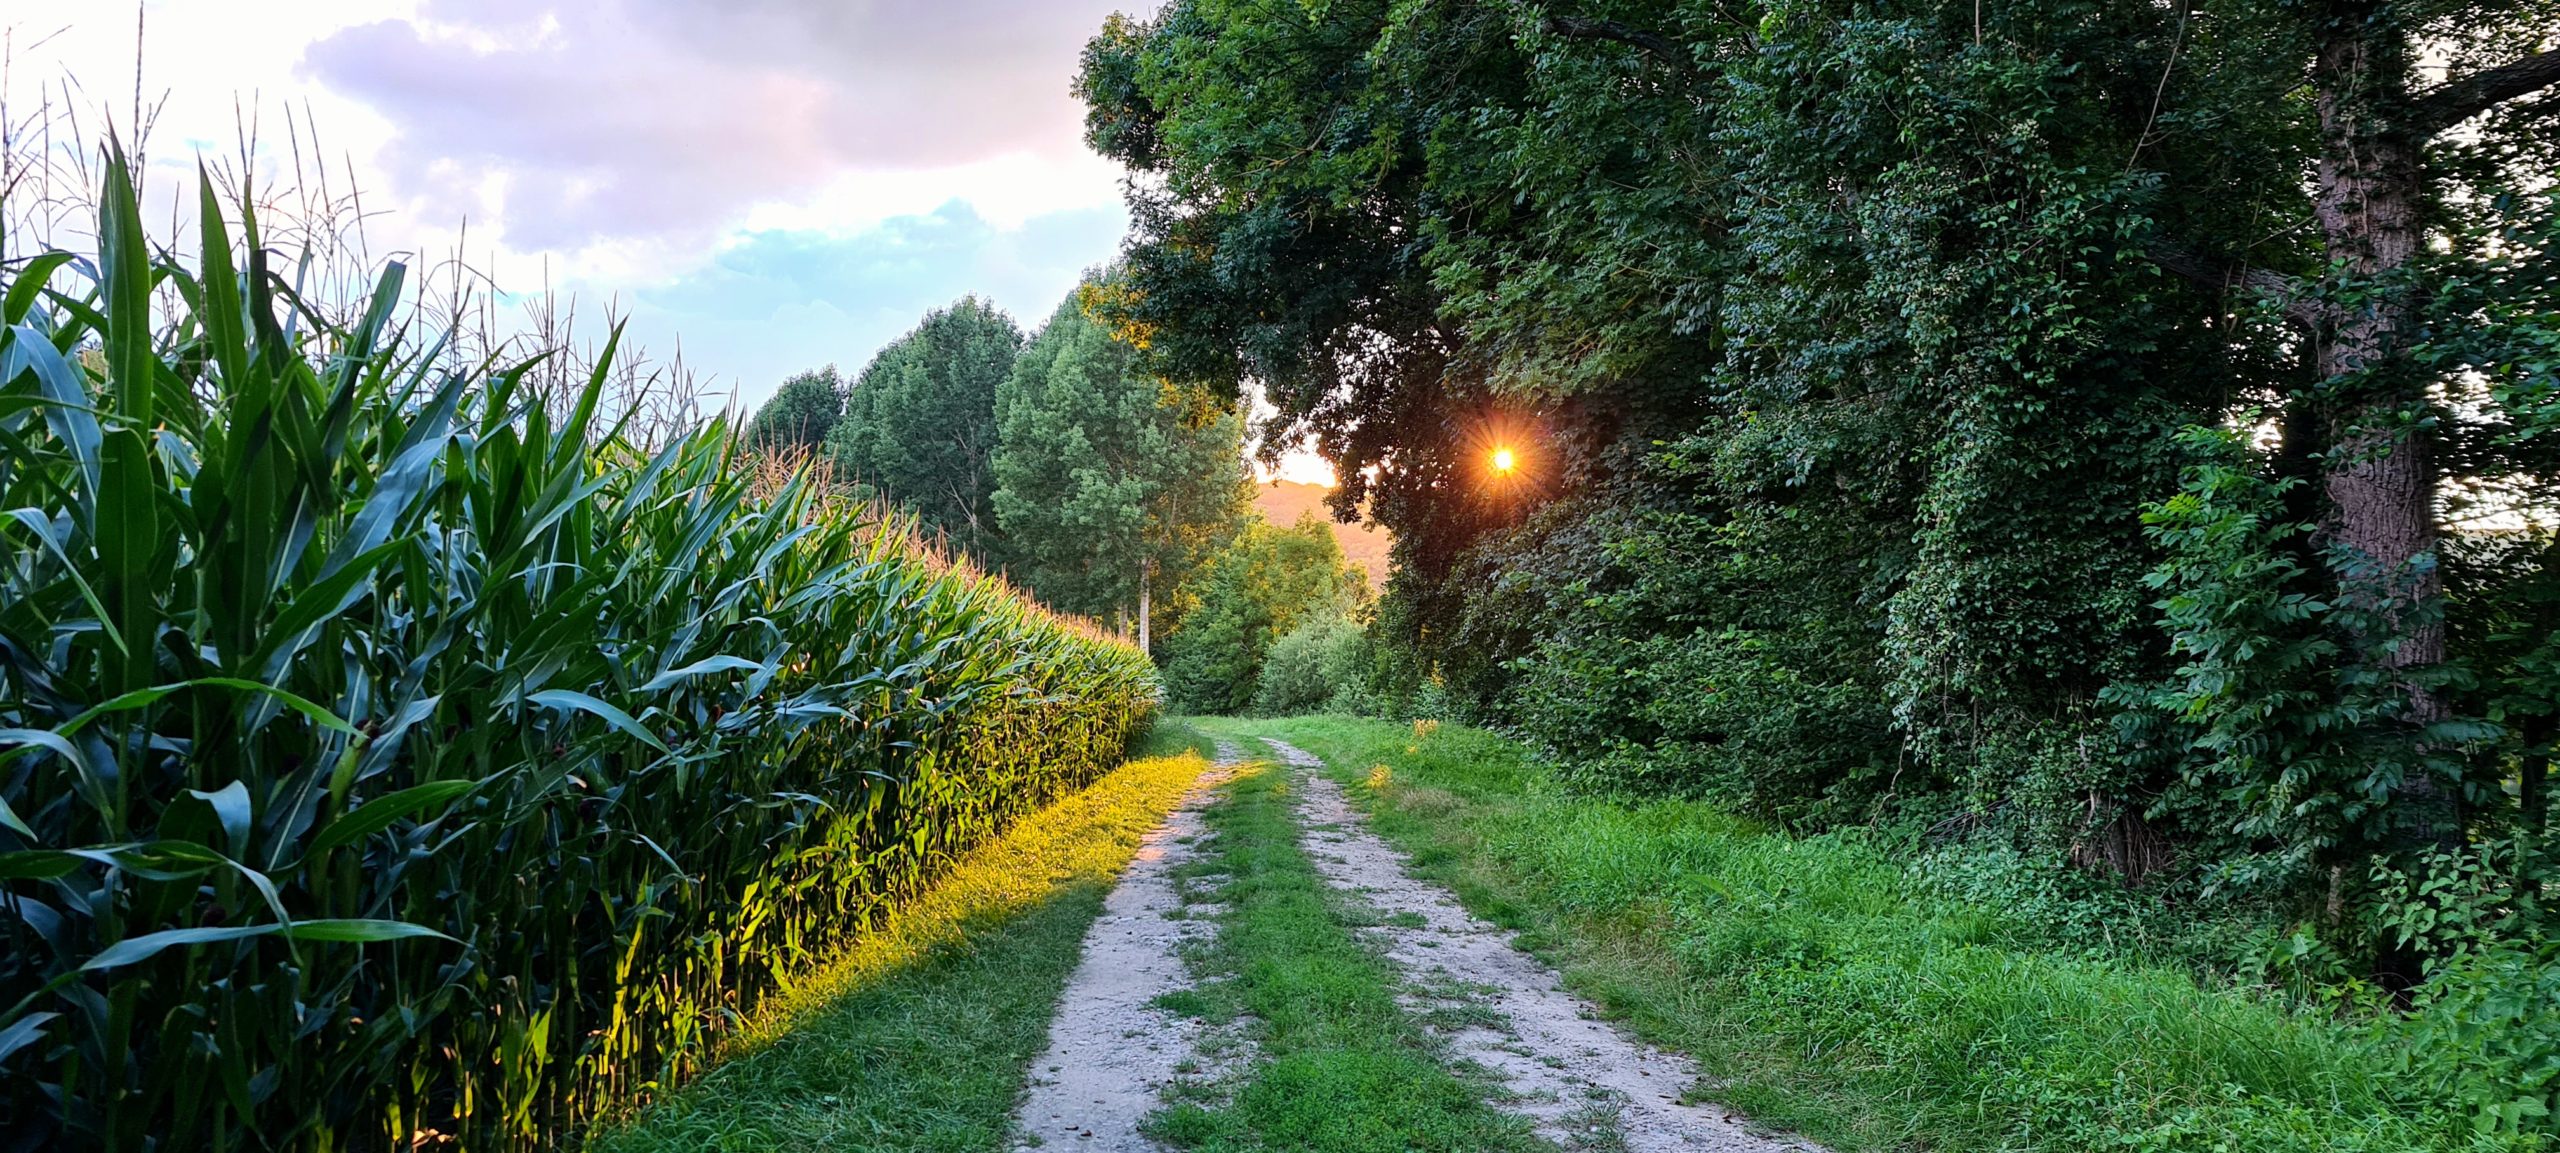 a farm path next to a field of corn and some trees with the sun peeking through them